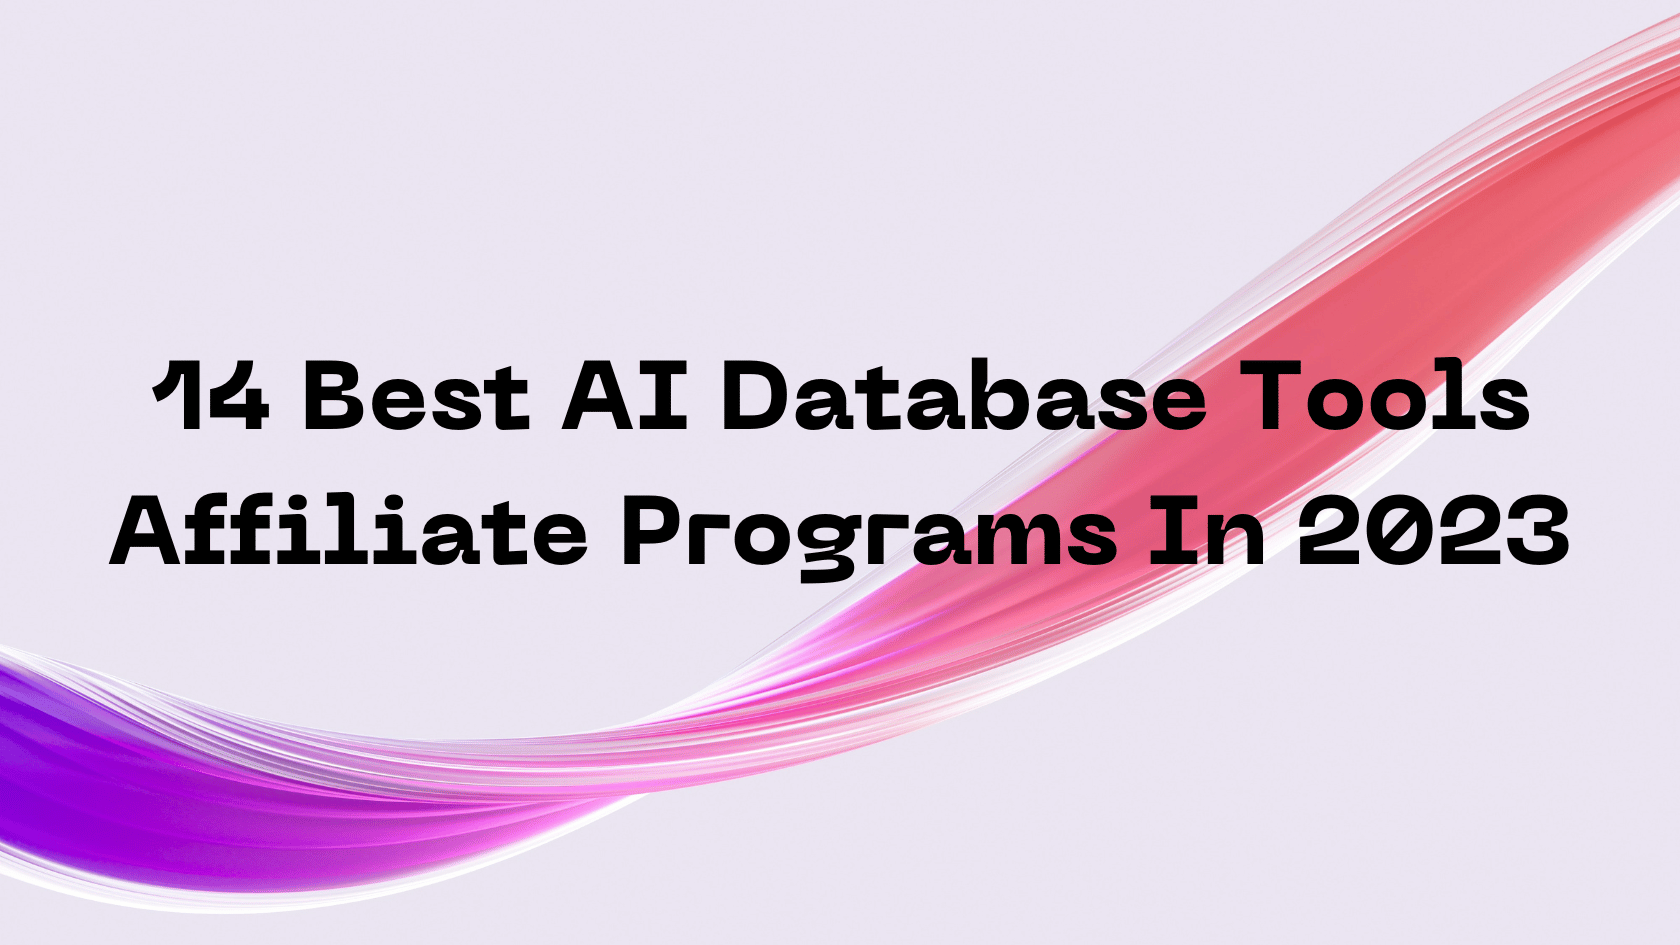 14 Best AI Database Tools Affiliate Programs In 2023